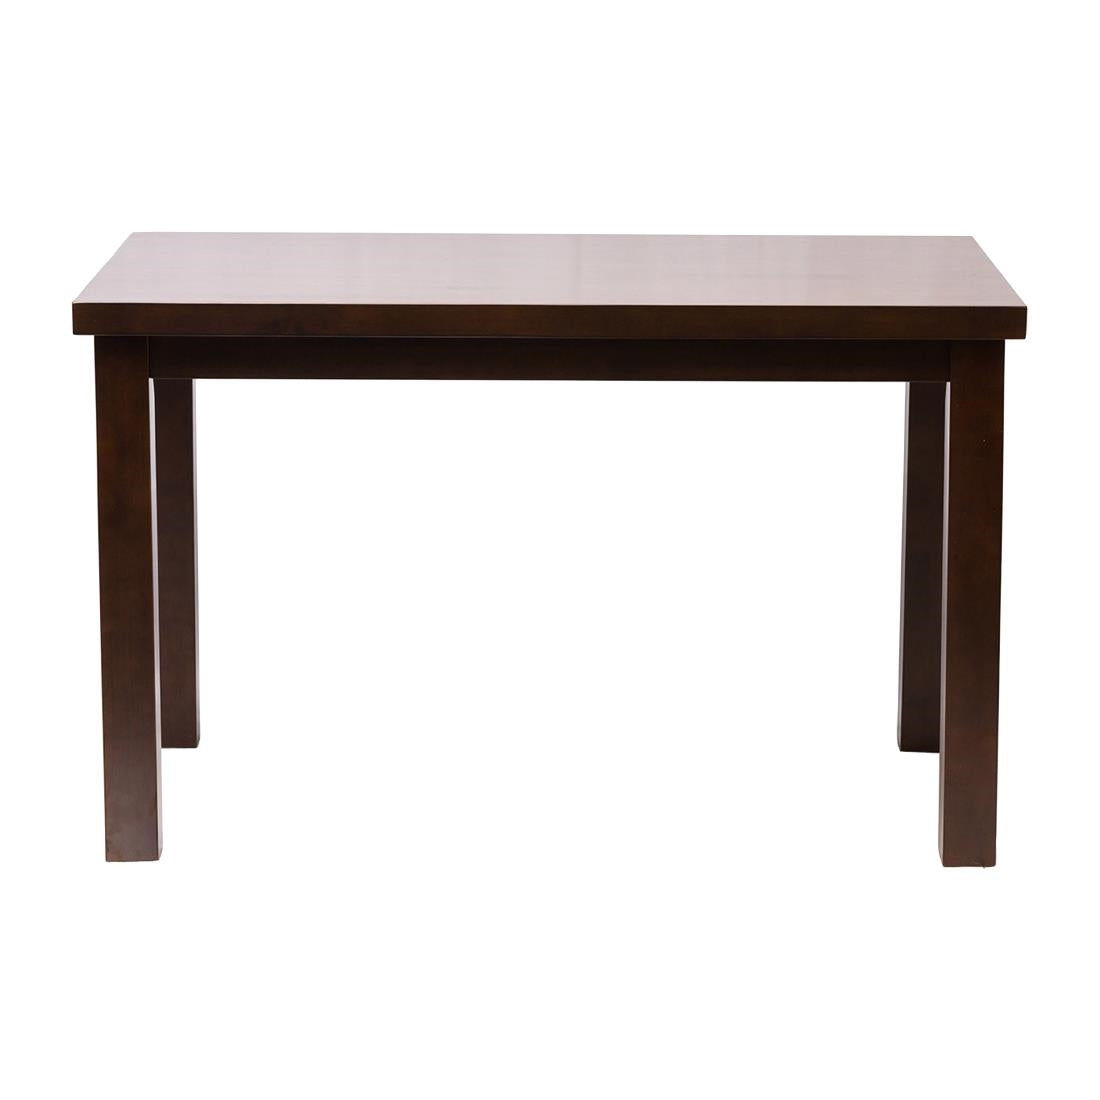 FT489 Kendal Rectangle Dining Table Dark Wood 1200x700mm JD Catering Equipment Solutions Ltd